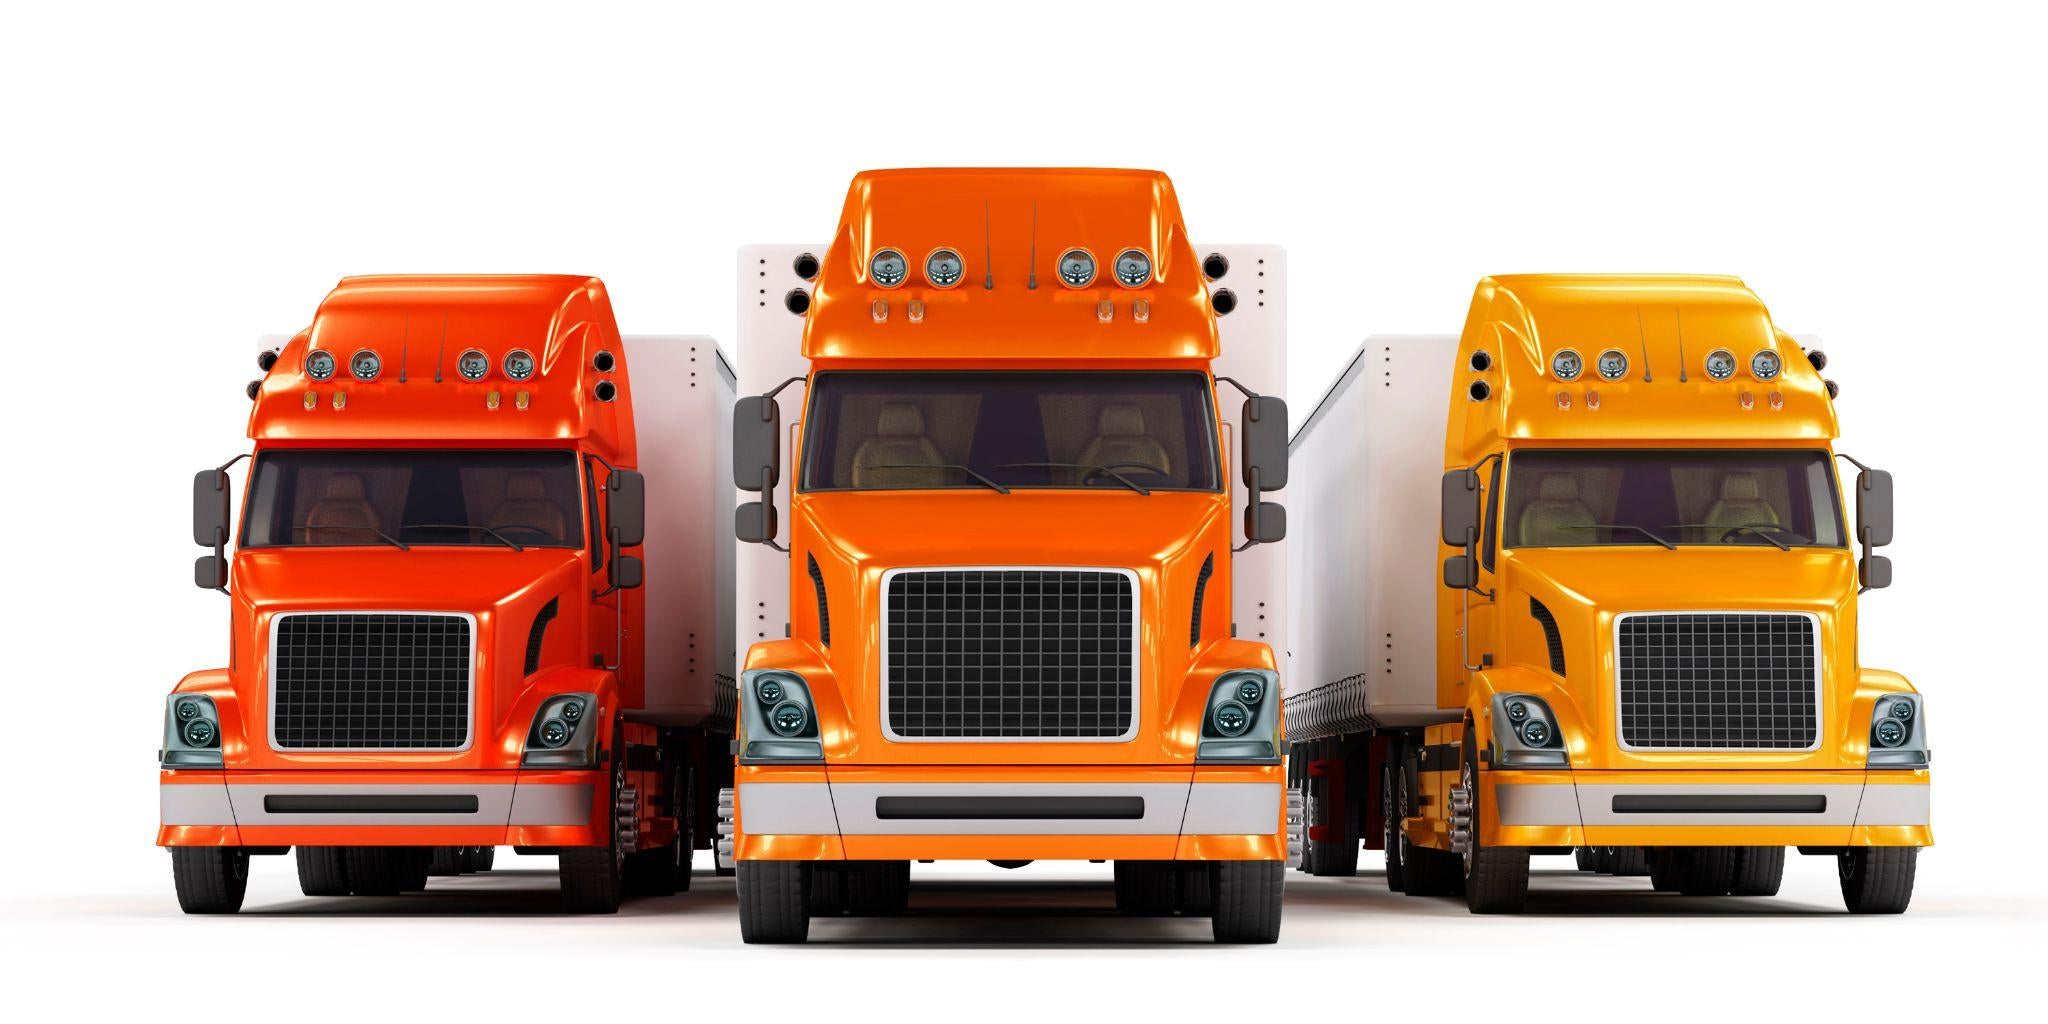 Trucking Essentials: Top 10 Things Drivers Say Are a Must-Have